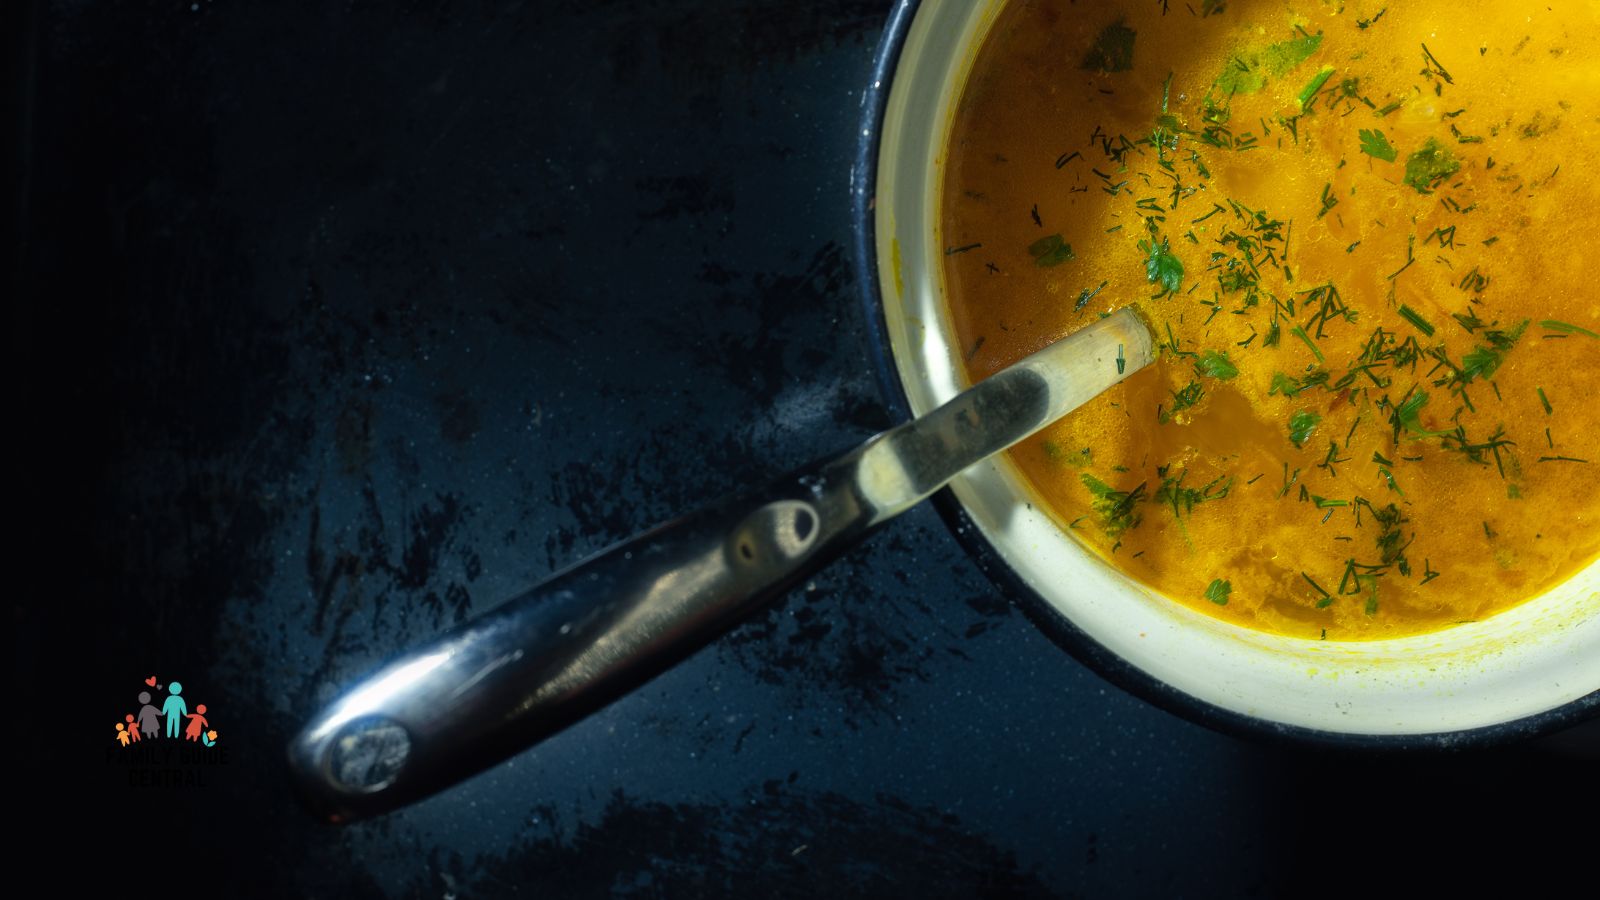 Sauce pan with cream soup in it - familyguidecentral.com